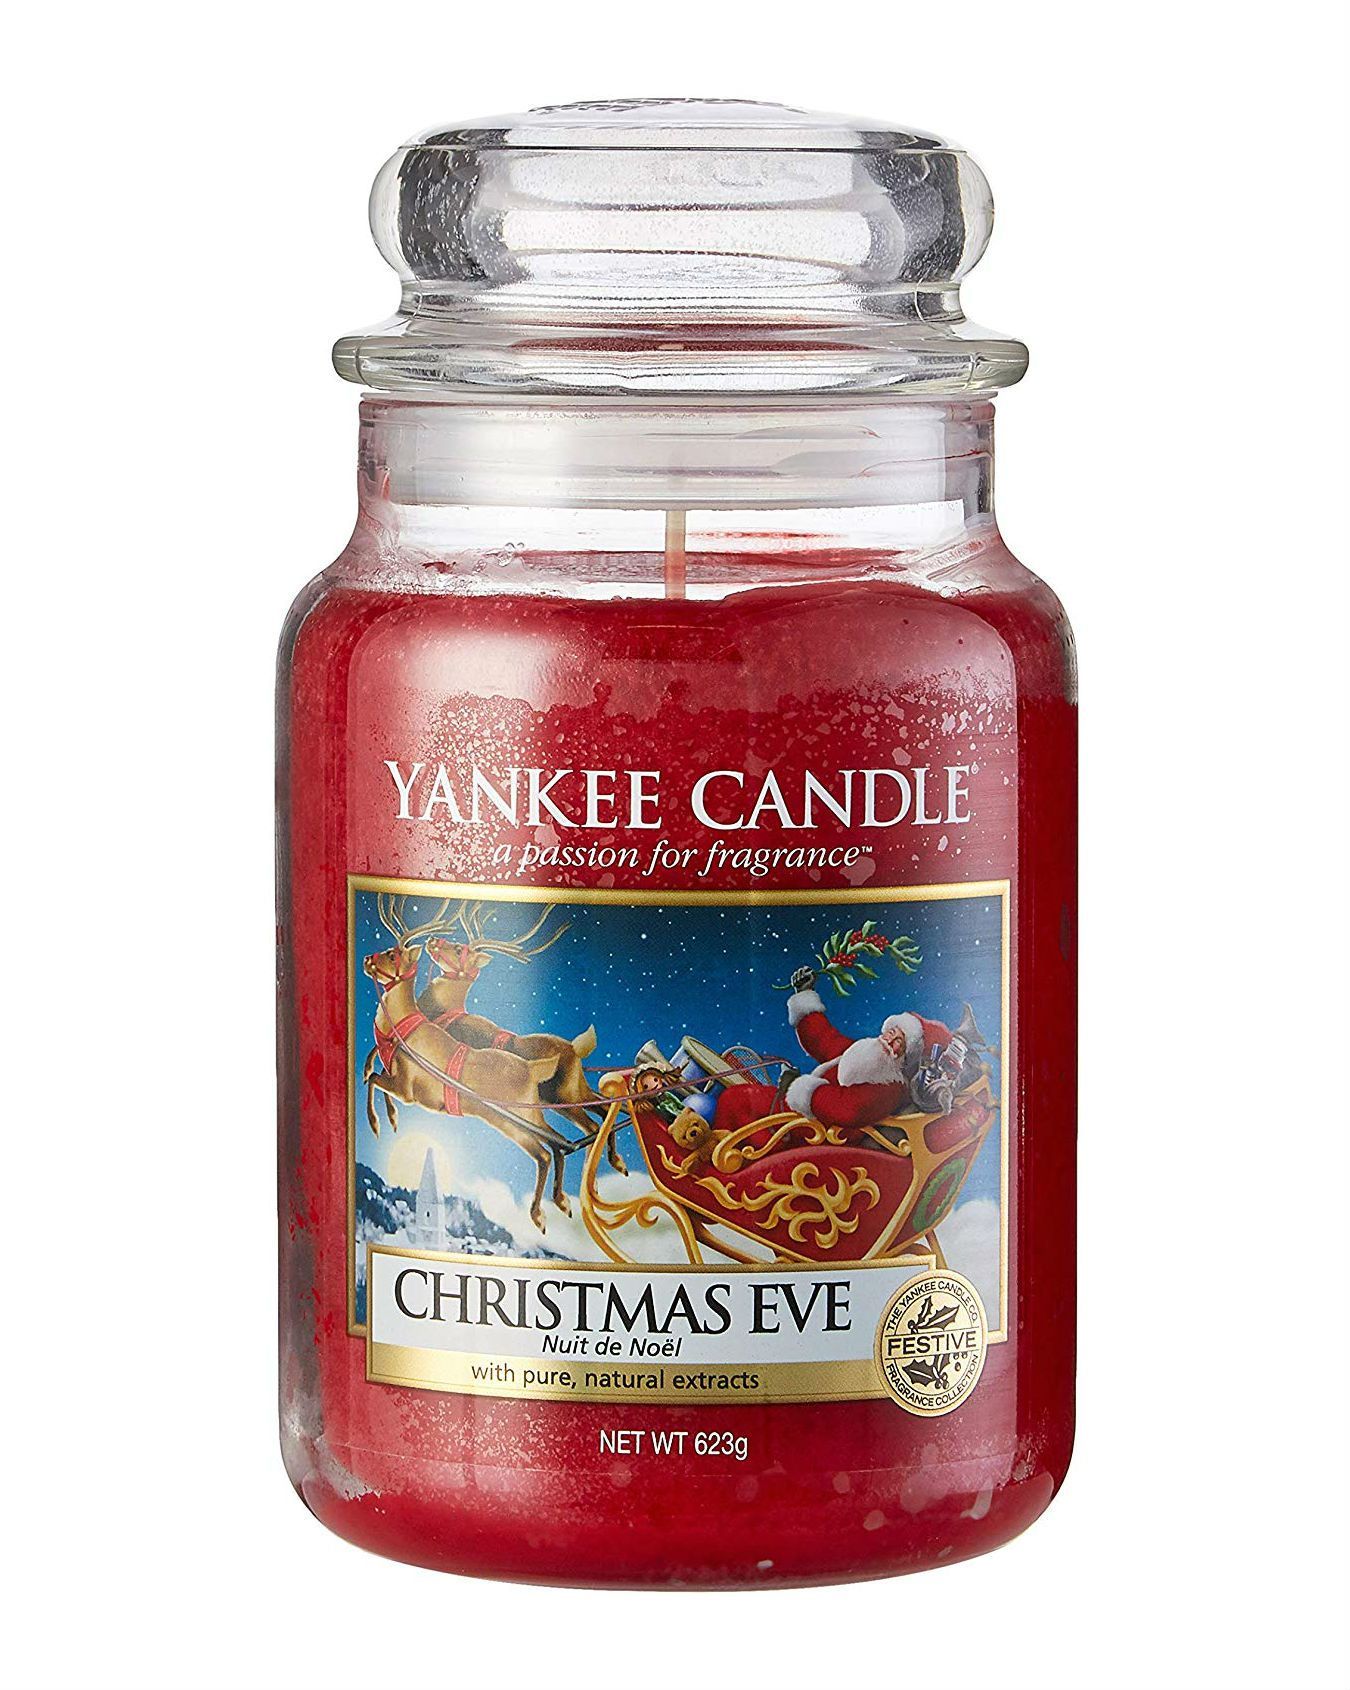 YANKEE CANDLE Christmas Eve Large Jar Candle,Fresh Scent 